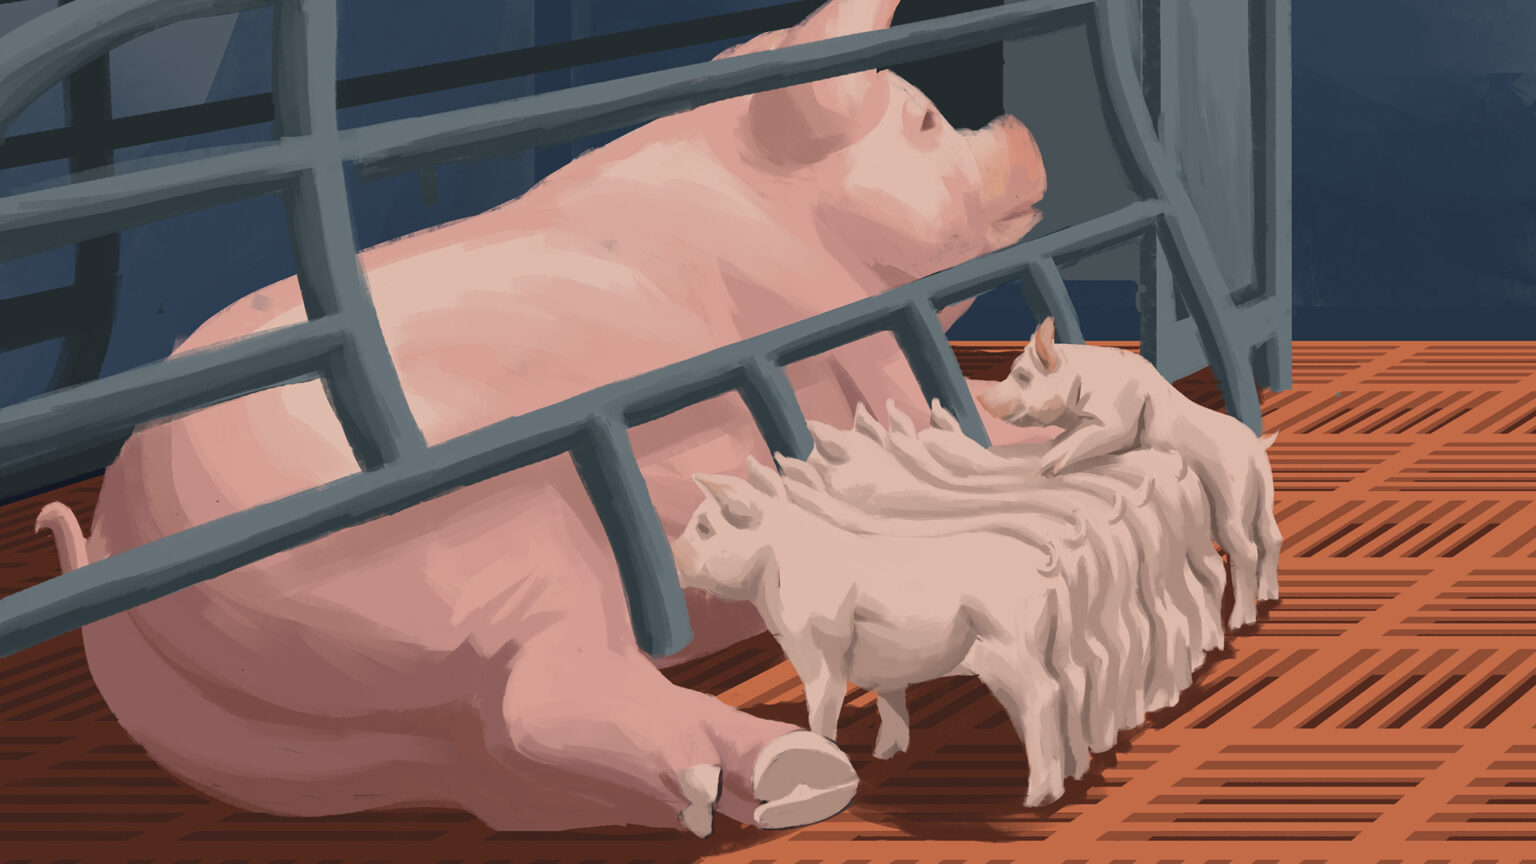 An illustration shows six piglets suckling on a sow laying on its side on a metal grate floor and behind a metal railing.